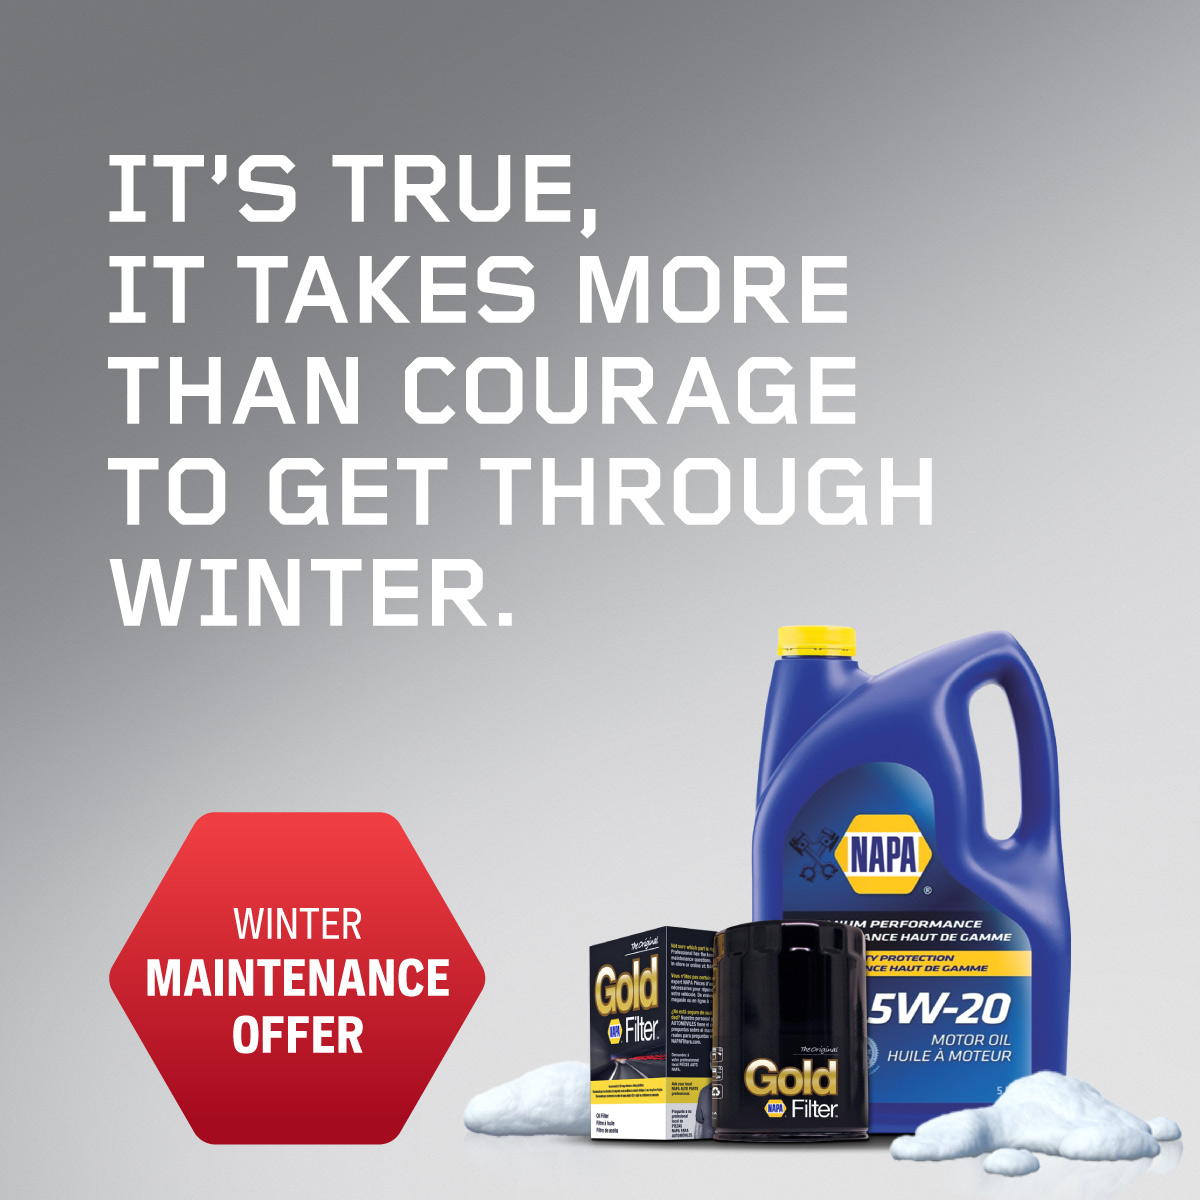 IT’S TRUE,
IT TAKES MORE
THAN COURAGE
TO GET THROUGH
WINTER.